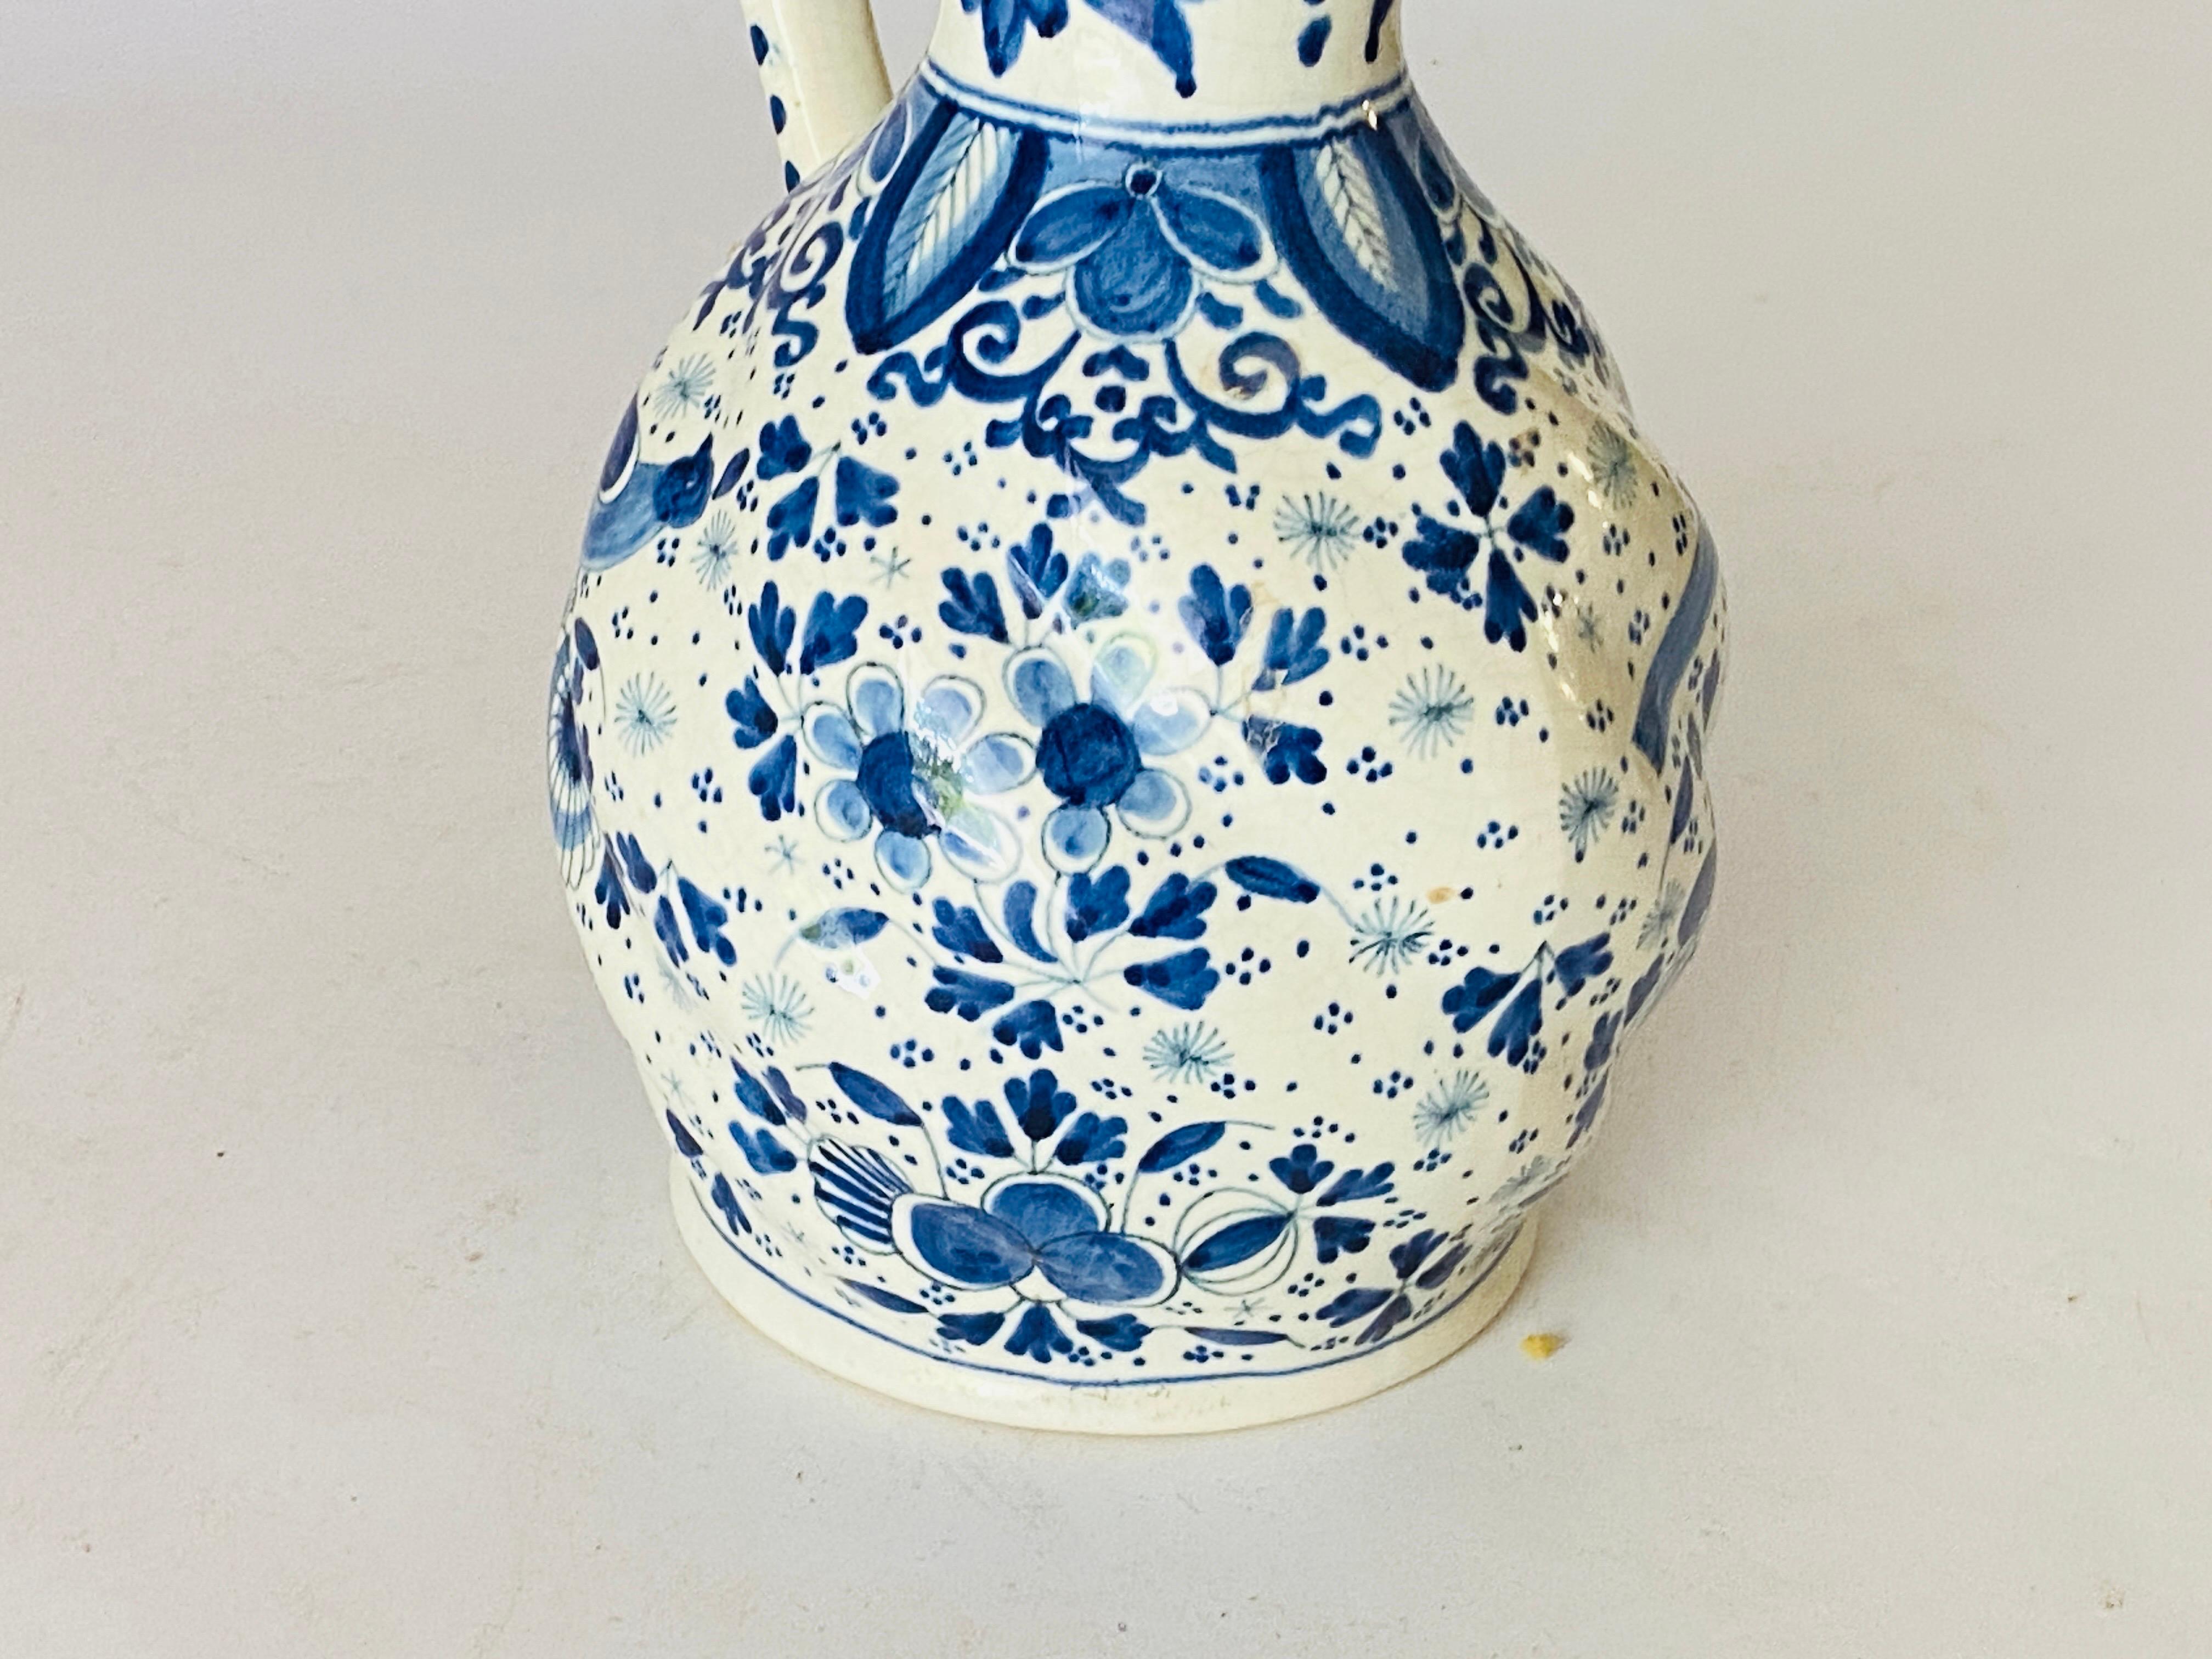 Chinoiserie Delft Jug in Faïence, White and Blue, 19th Century Netherlands For Sale